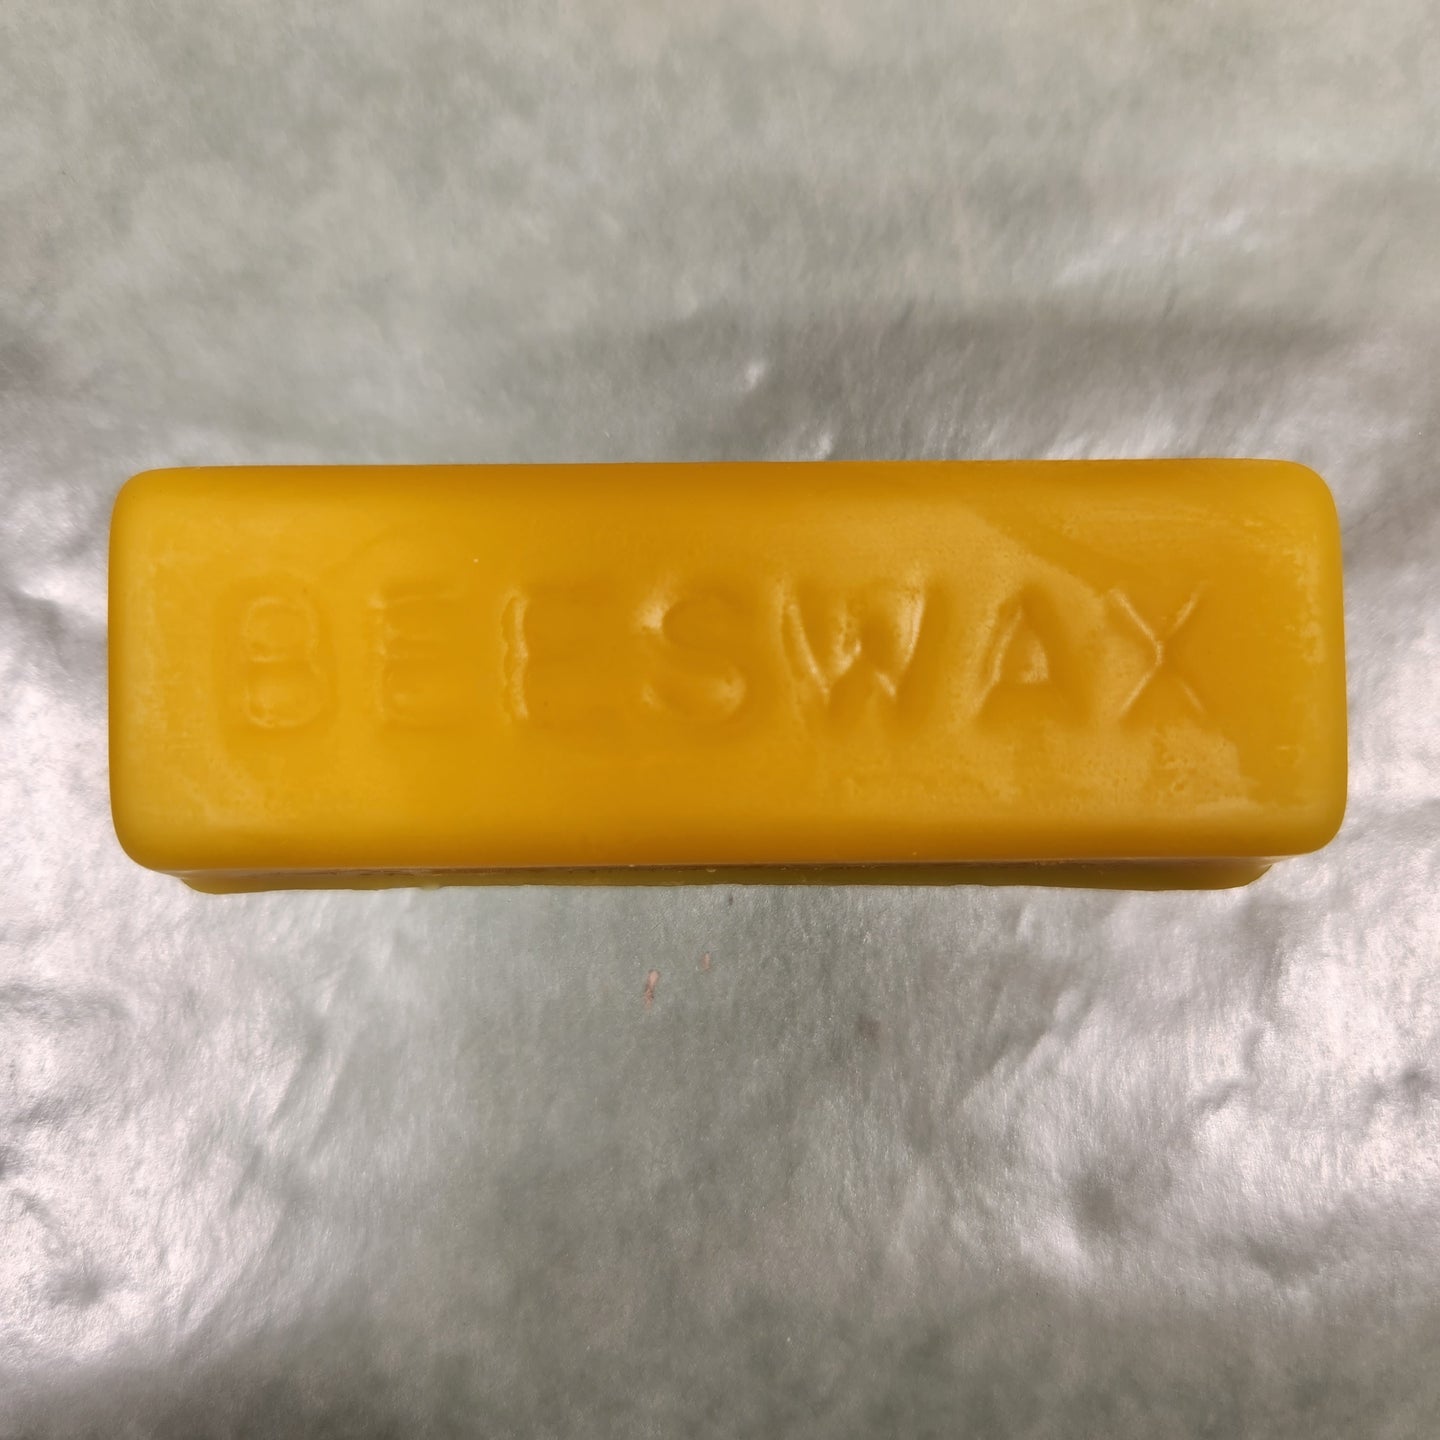 1 oz. Ohio Valley Local Pure Filtered Beeswax